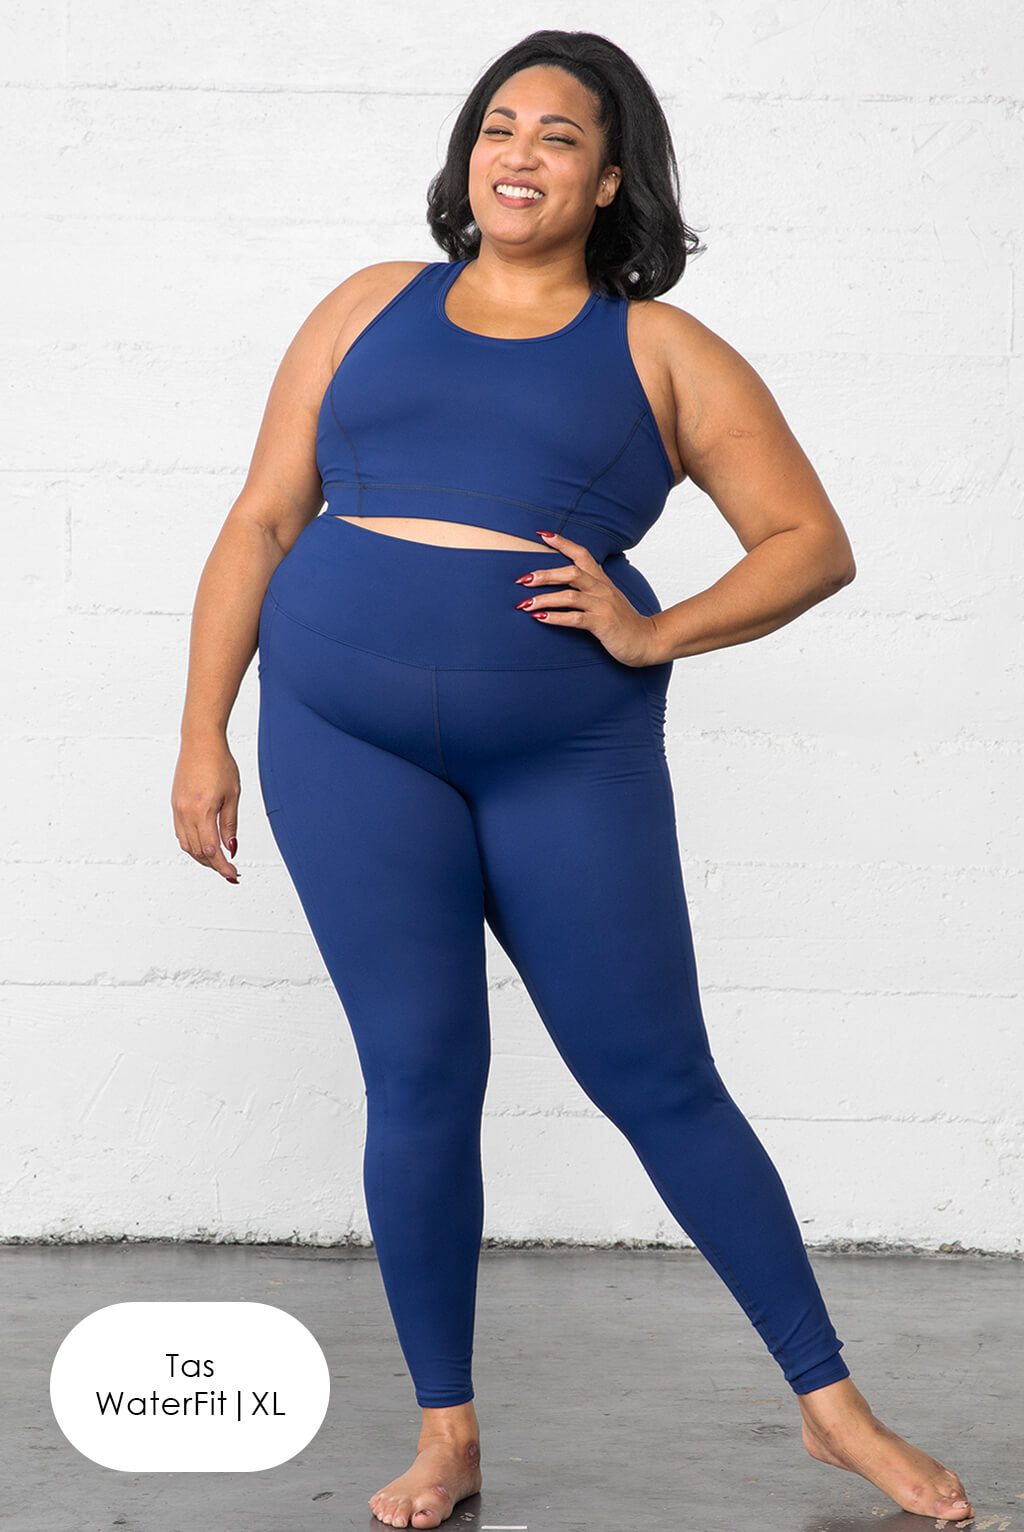 Spanx Leggings Sale: Get the Booty Boost Leggings for 30% Off